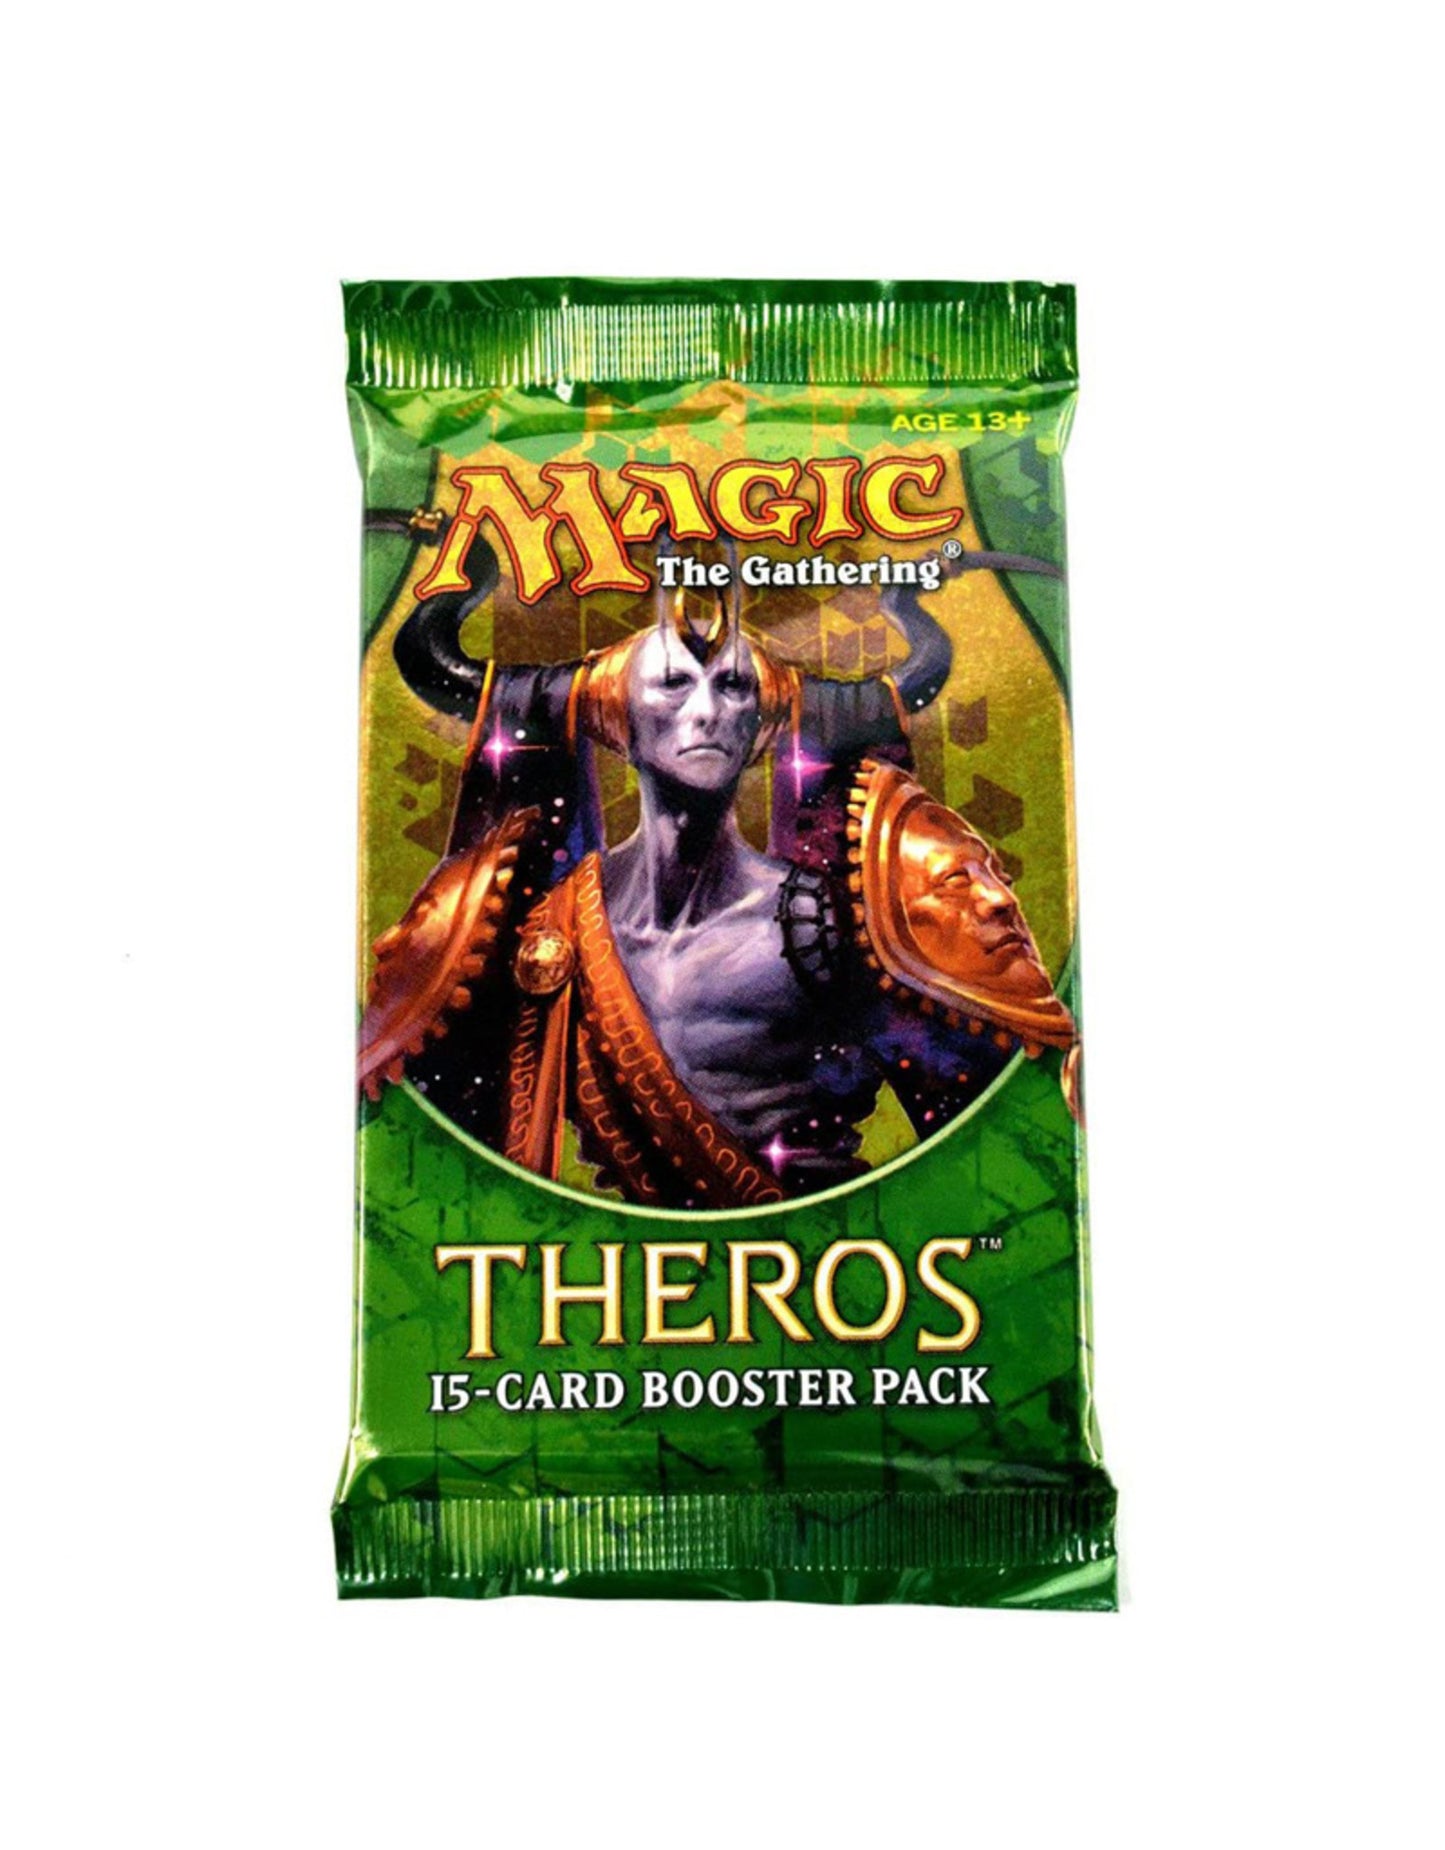 Magic the Gathering: Theros Booster Pack